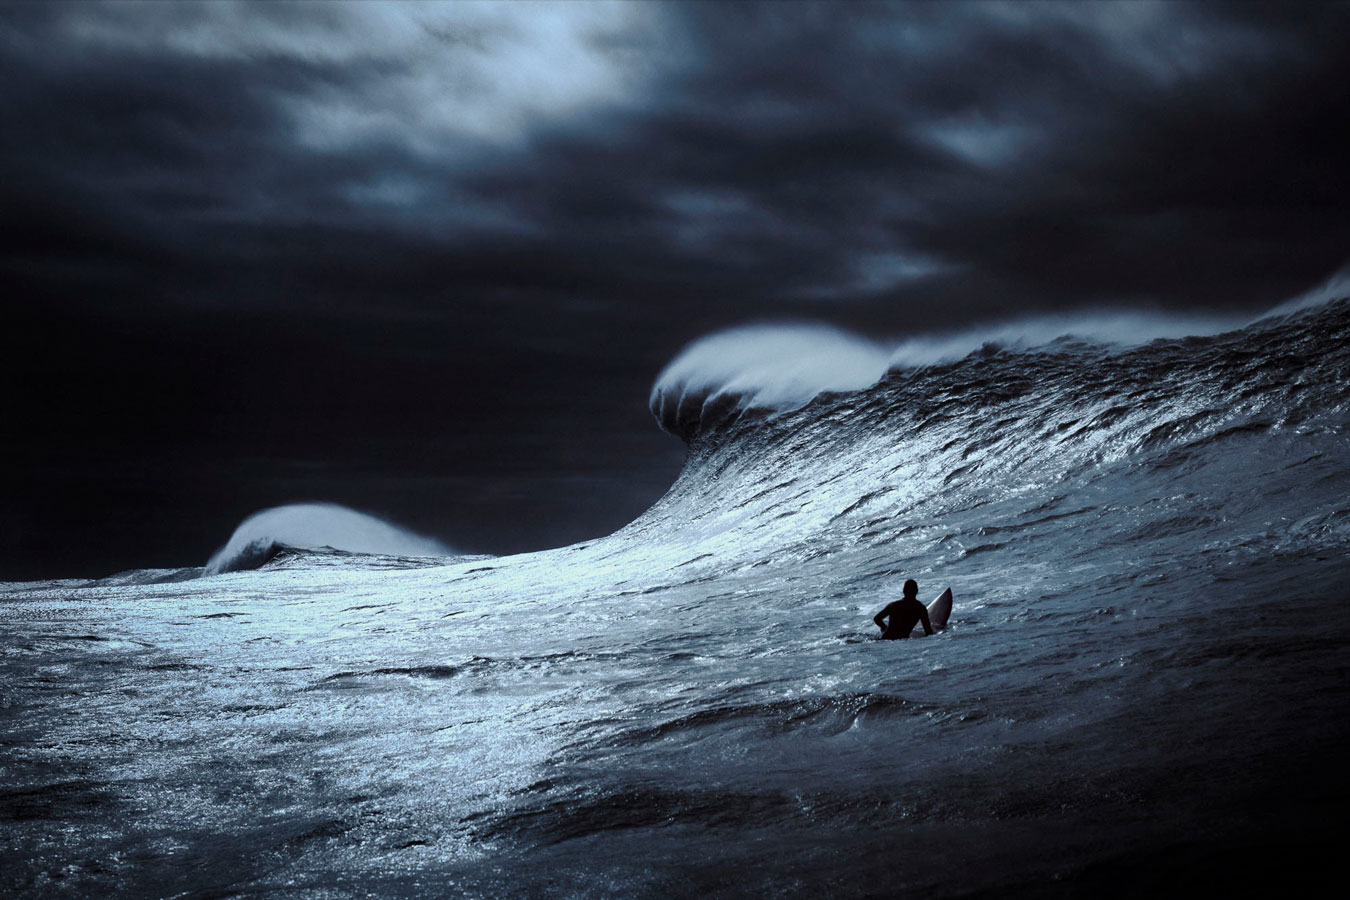 small-figure-dwarfed-by-large-wave